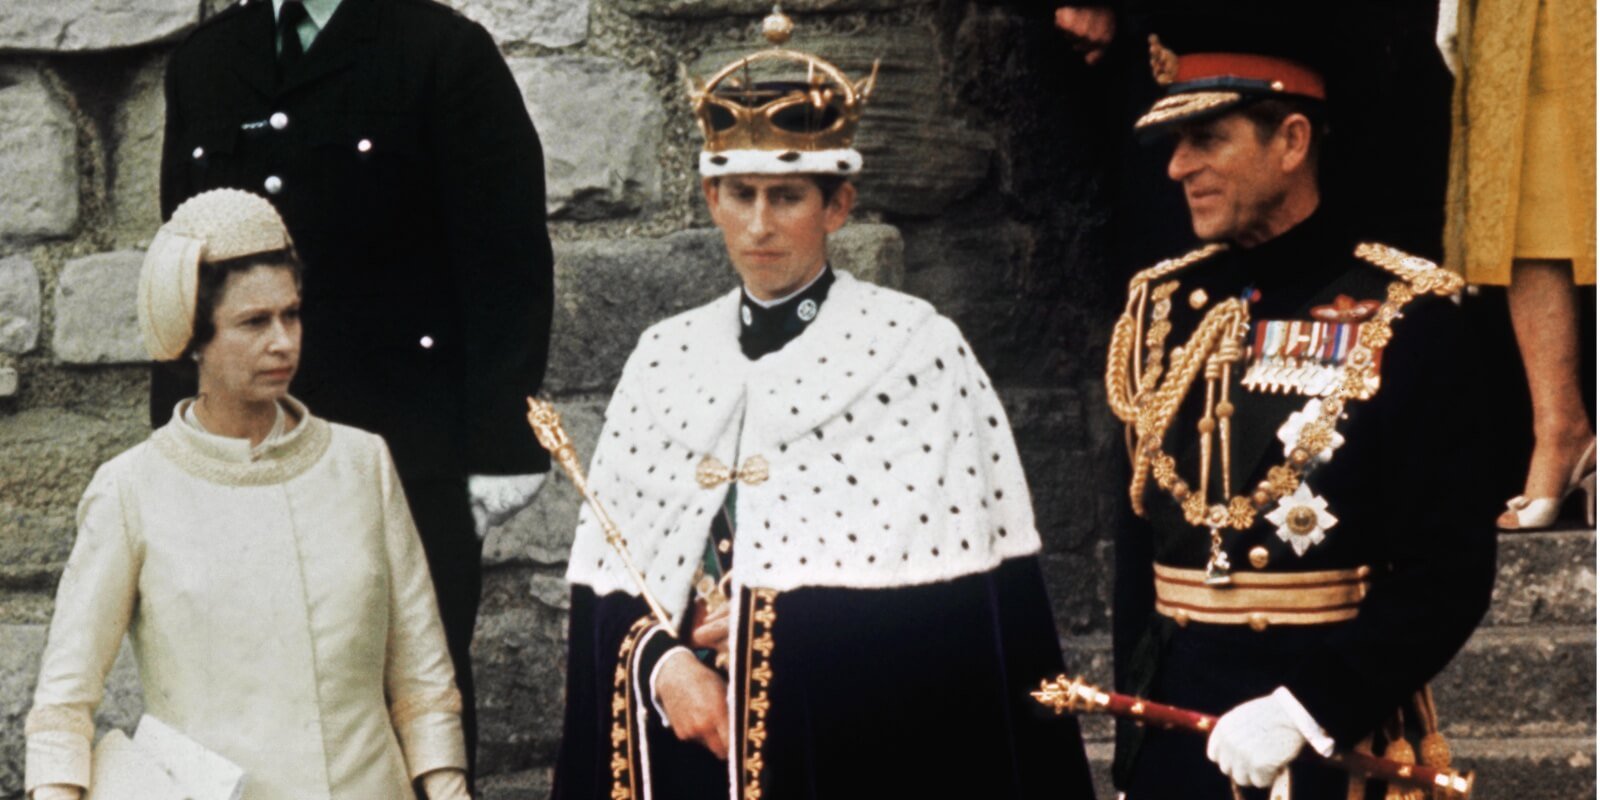 Then-Prince Charles crowned Prince of Wales, photographed with Queen Elizabeth and Prince Philip, in 1969.